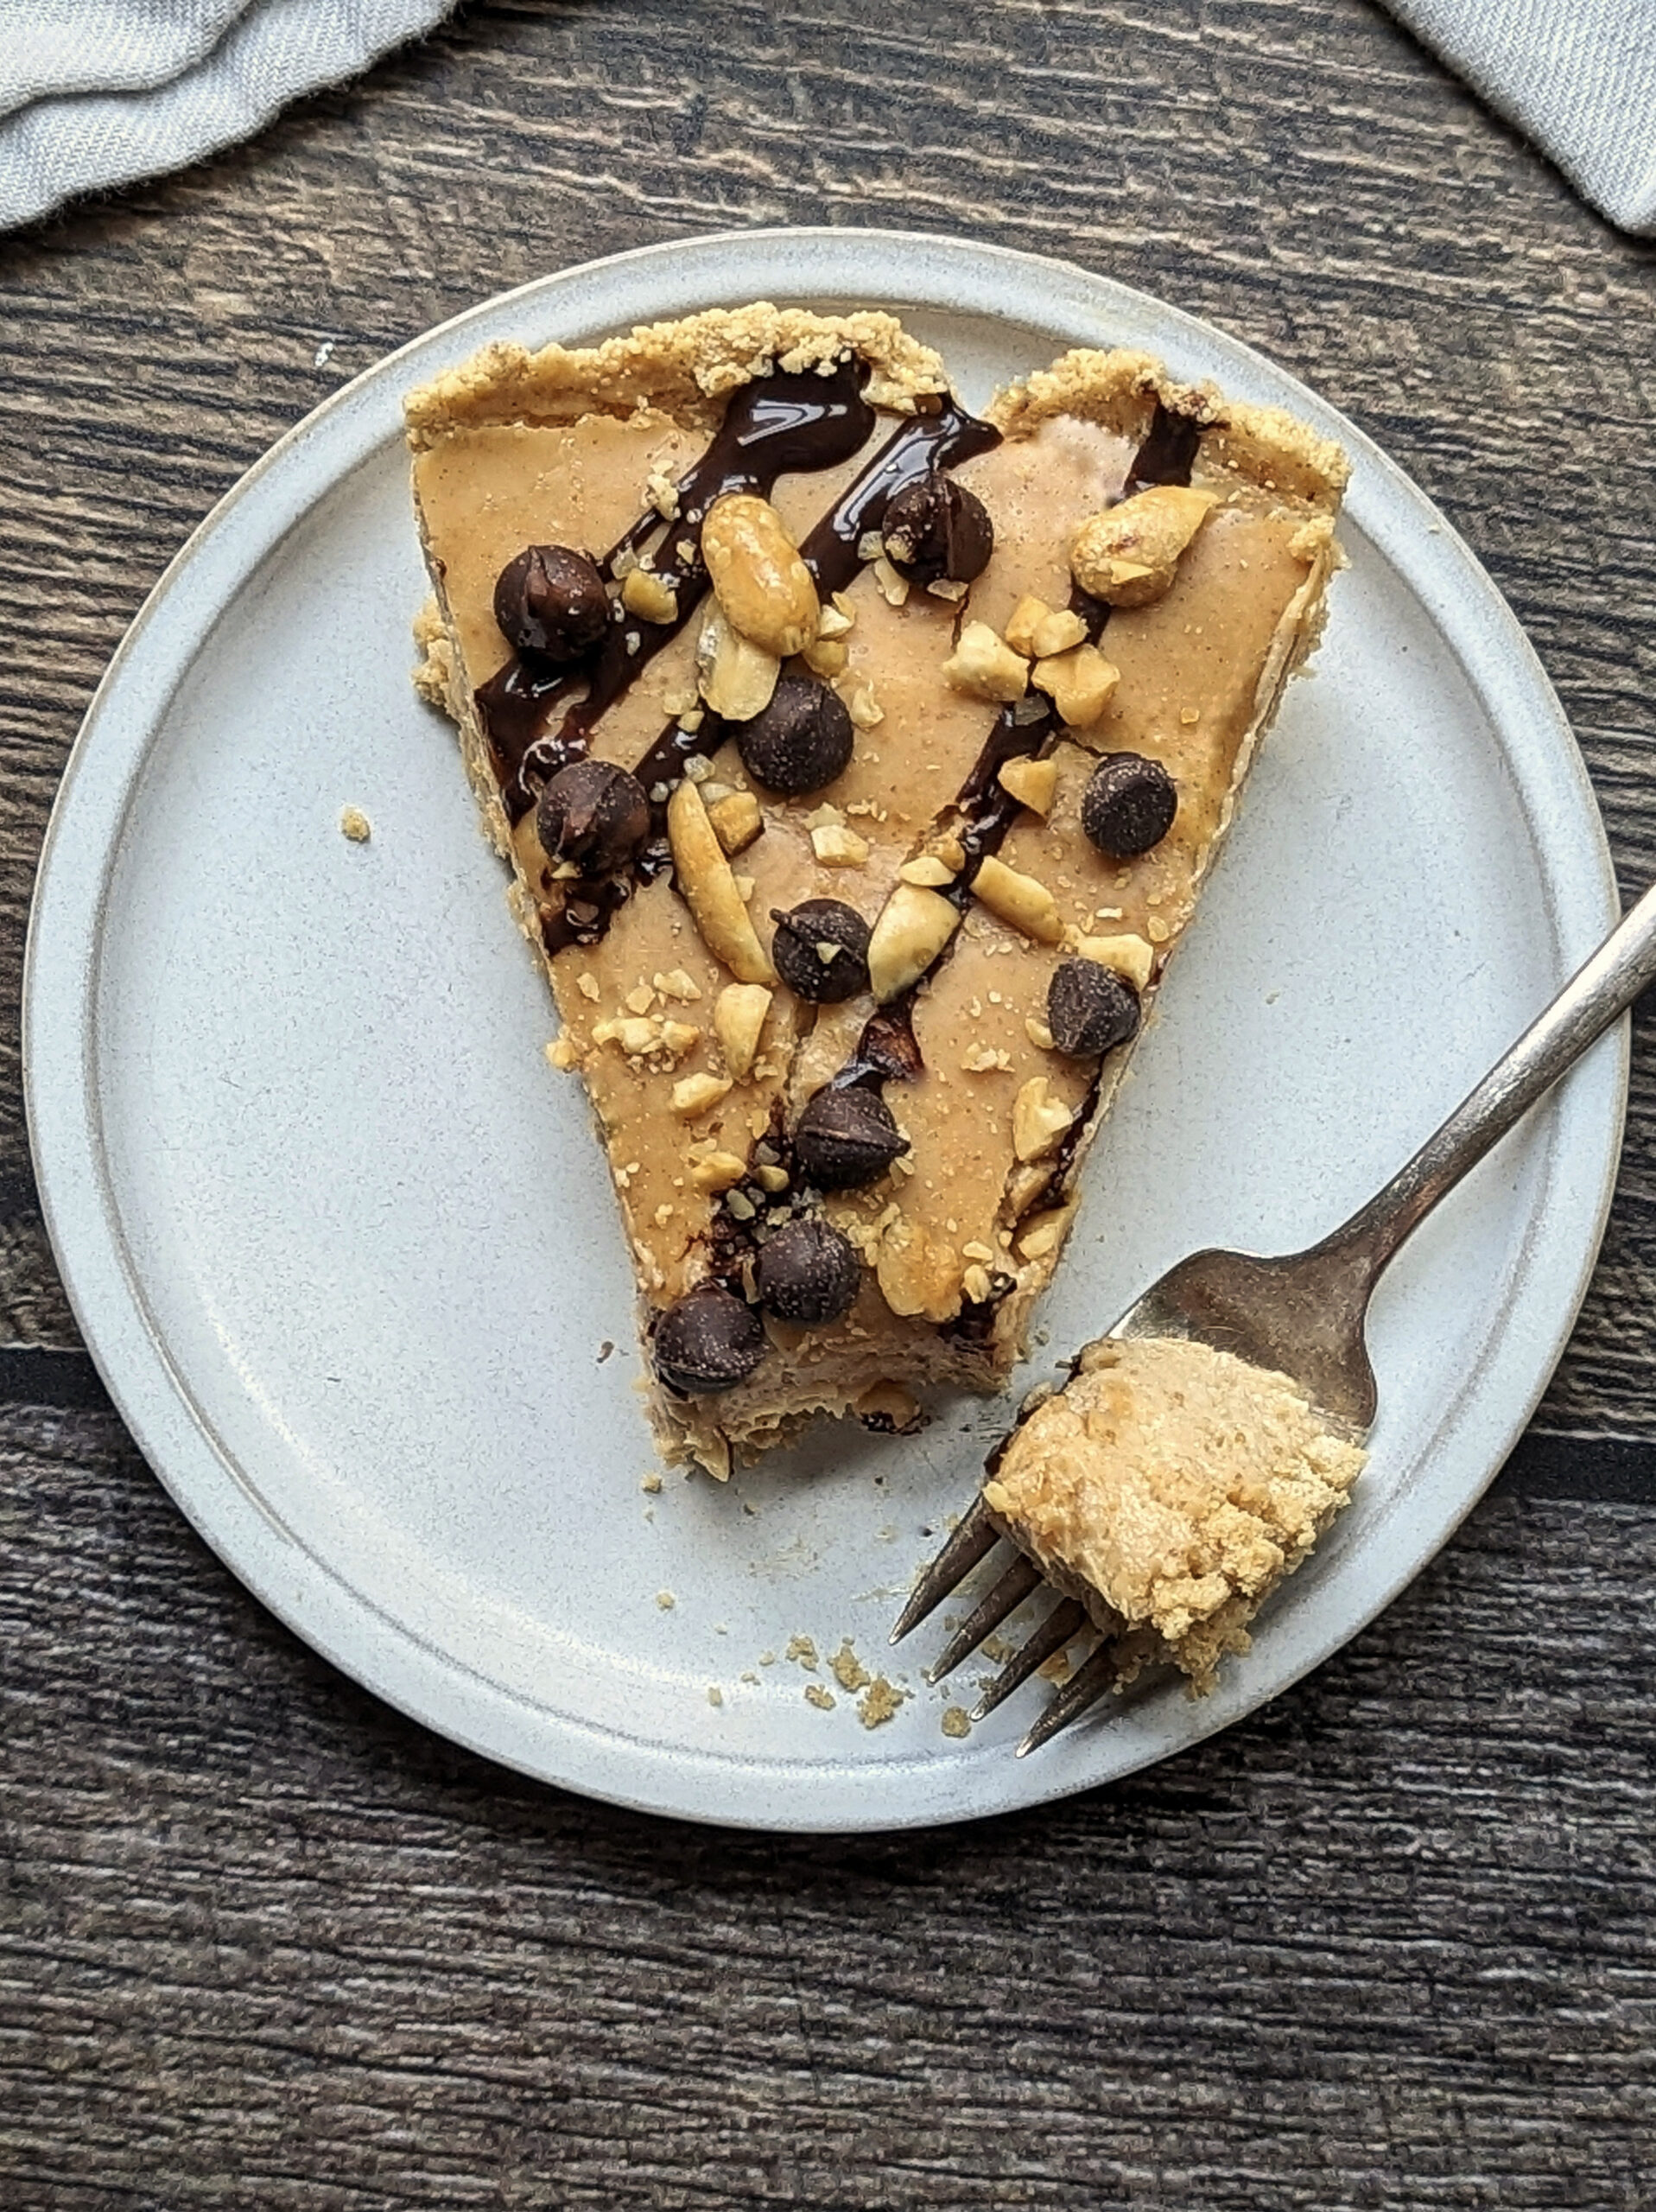 A slice of our Silky Peanut Butter Pie Recipe topped with chocolate syrup, melted peanut butter, chocolate chips, and peanuts.